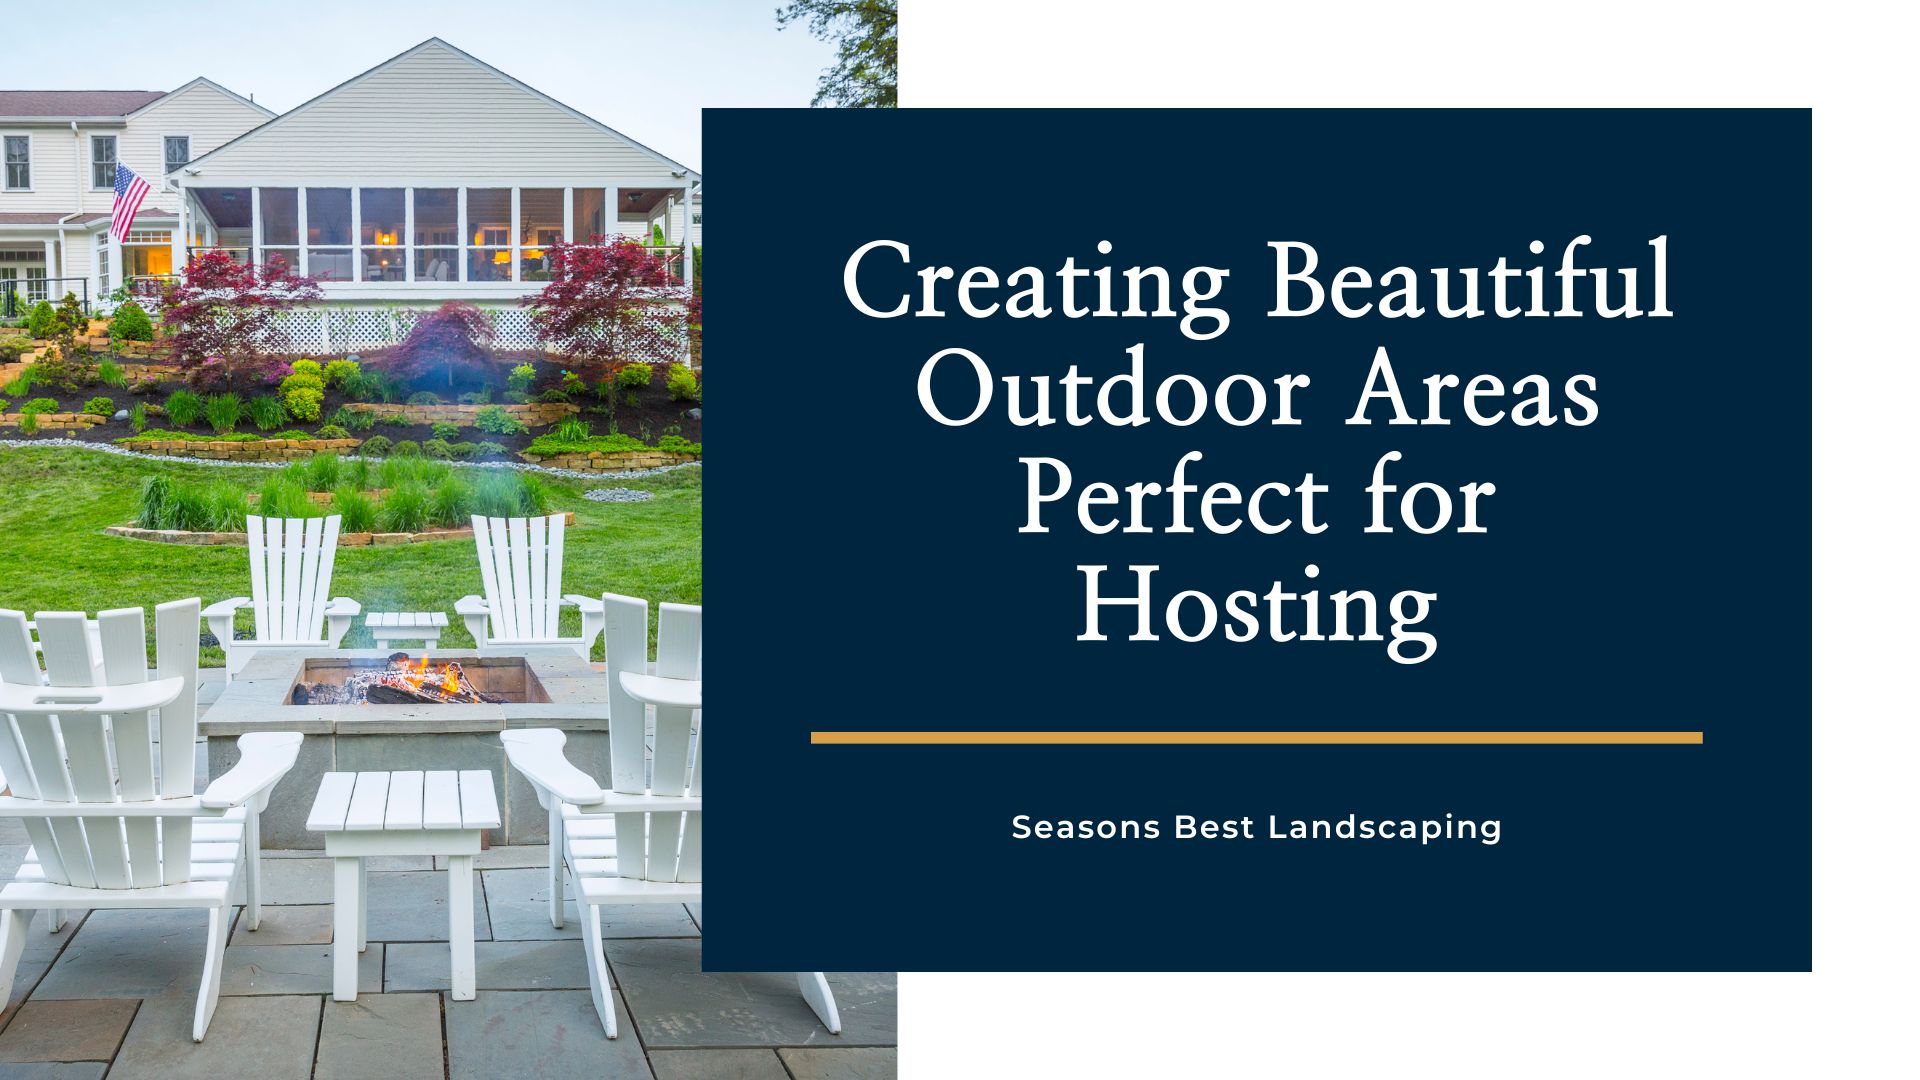 Outdoor Entertainment Gathering Space - Seasons Best Landscaping